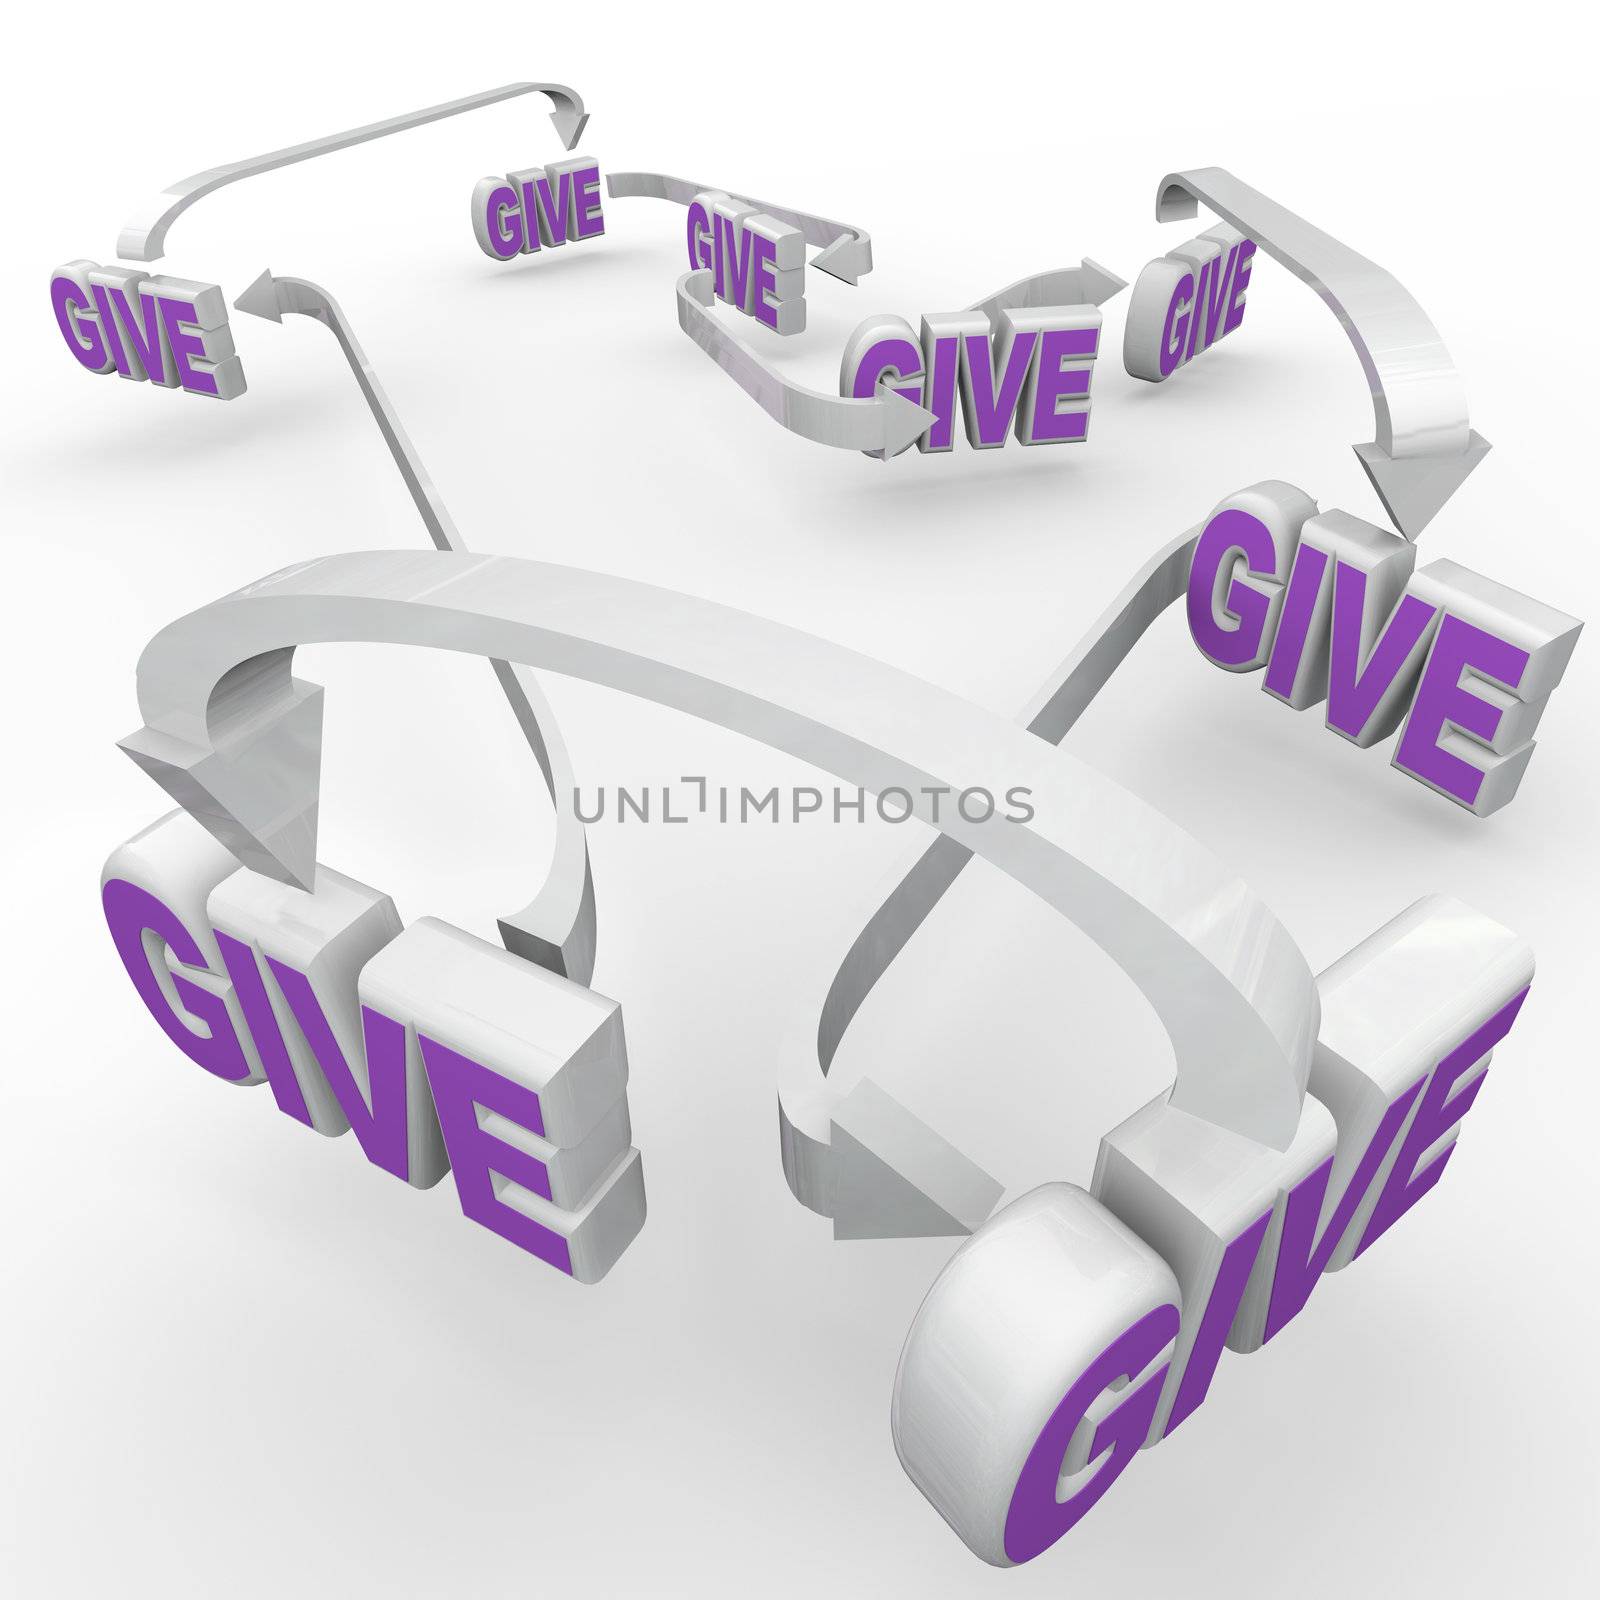 Many Give words connected by arrows representing fund-raising and spreading the word of relief efforts and charitable volunteer work